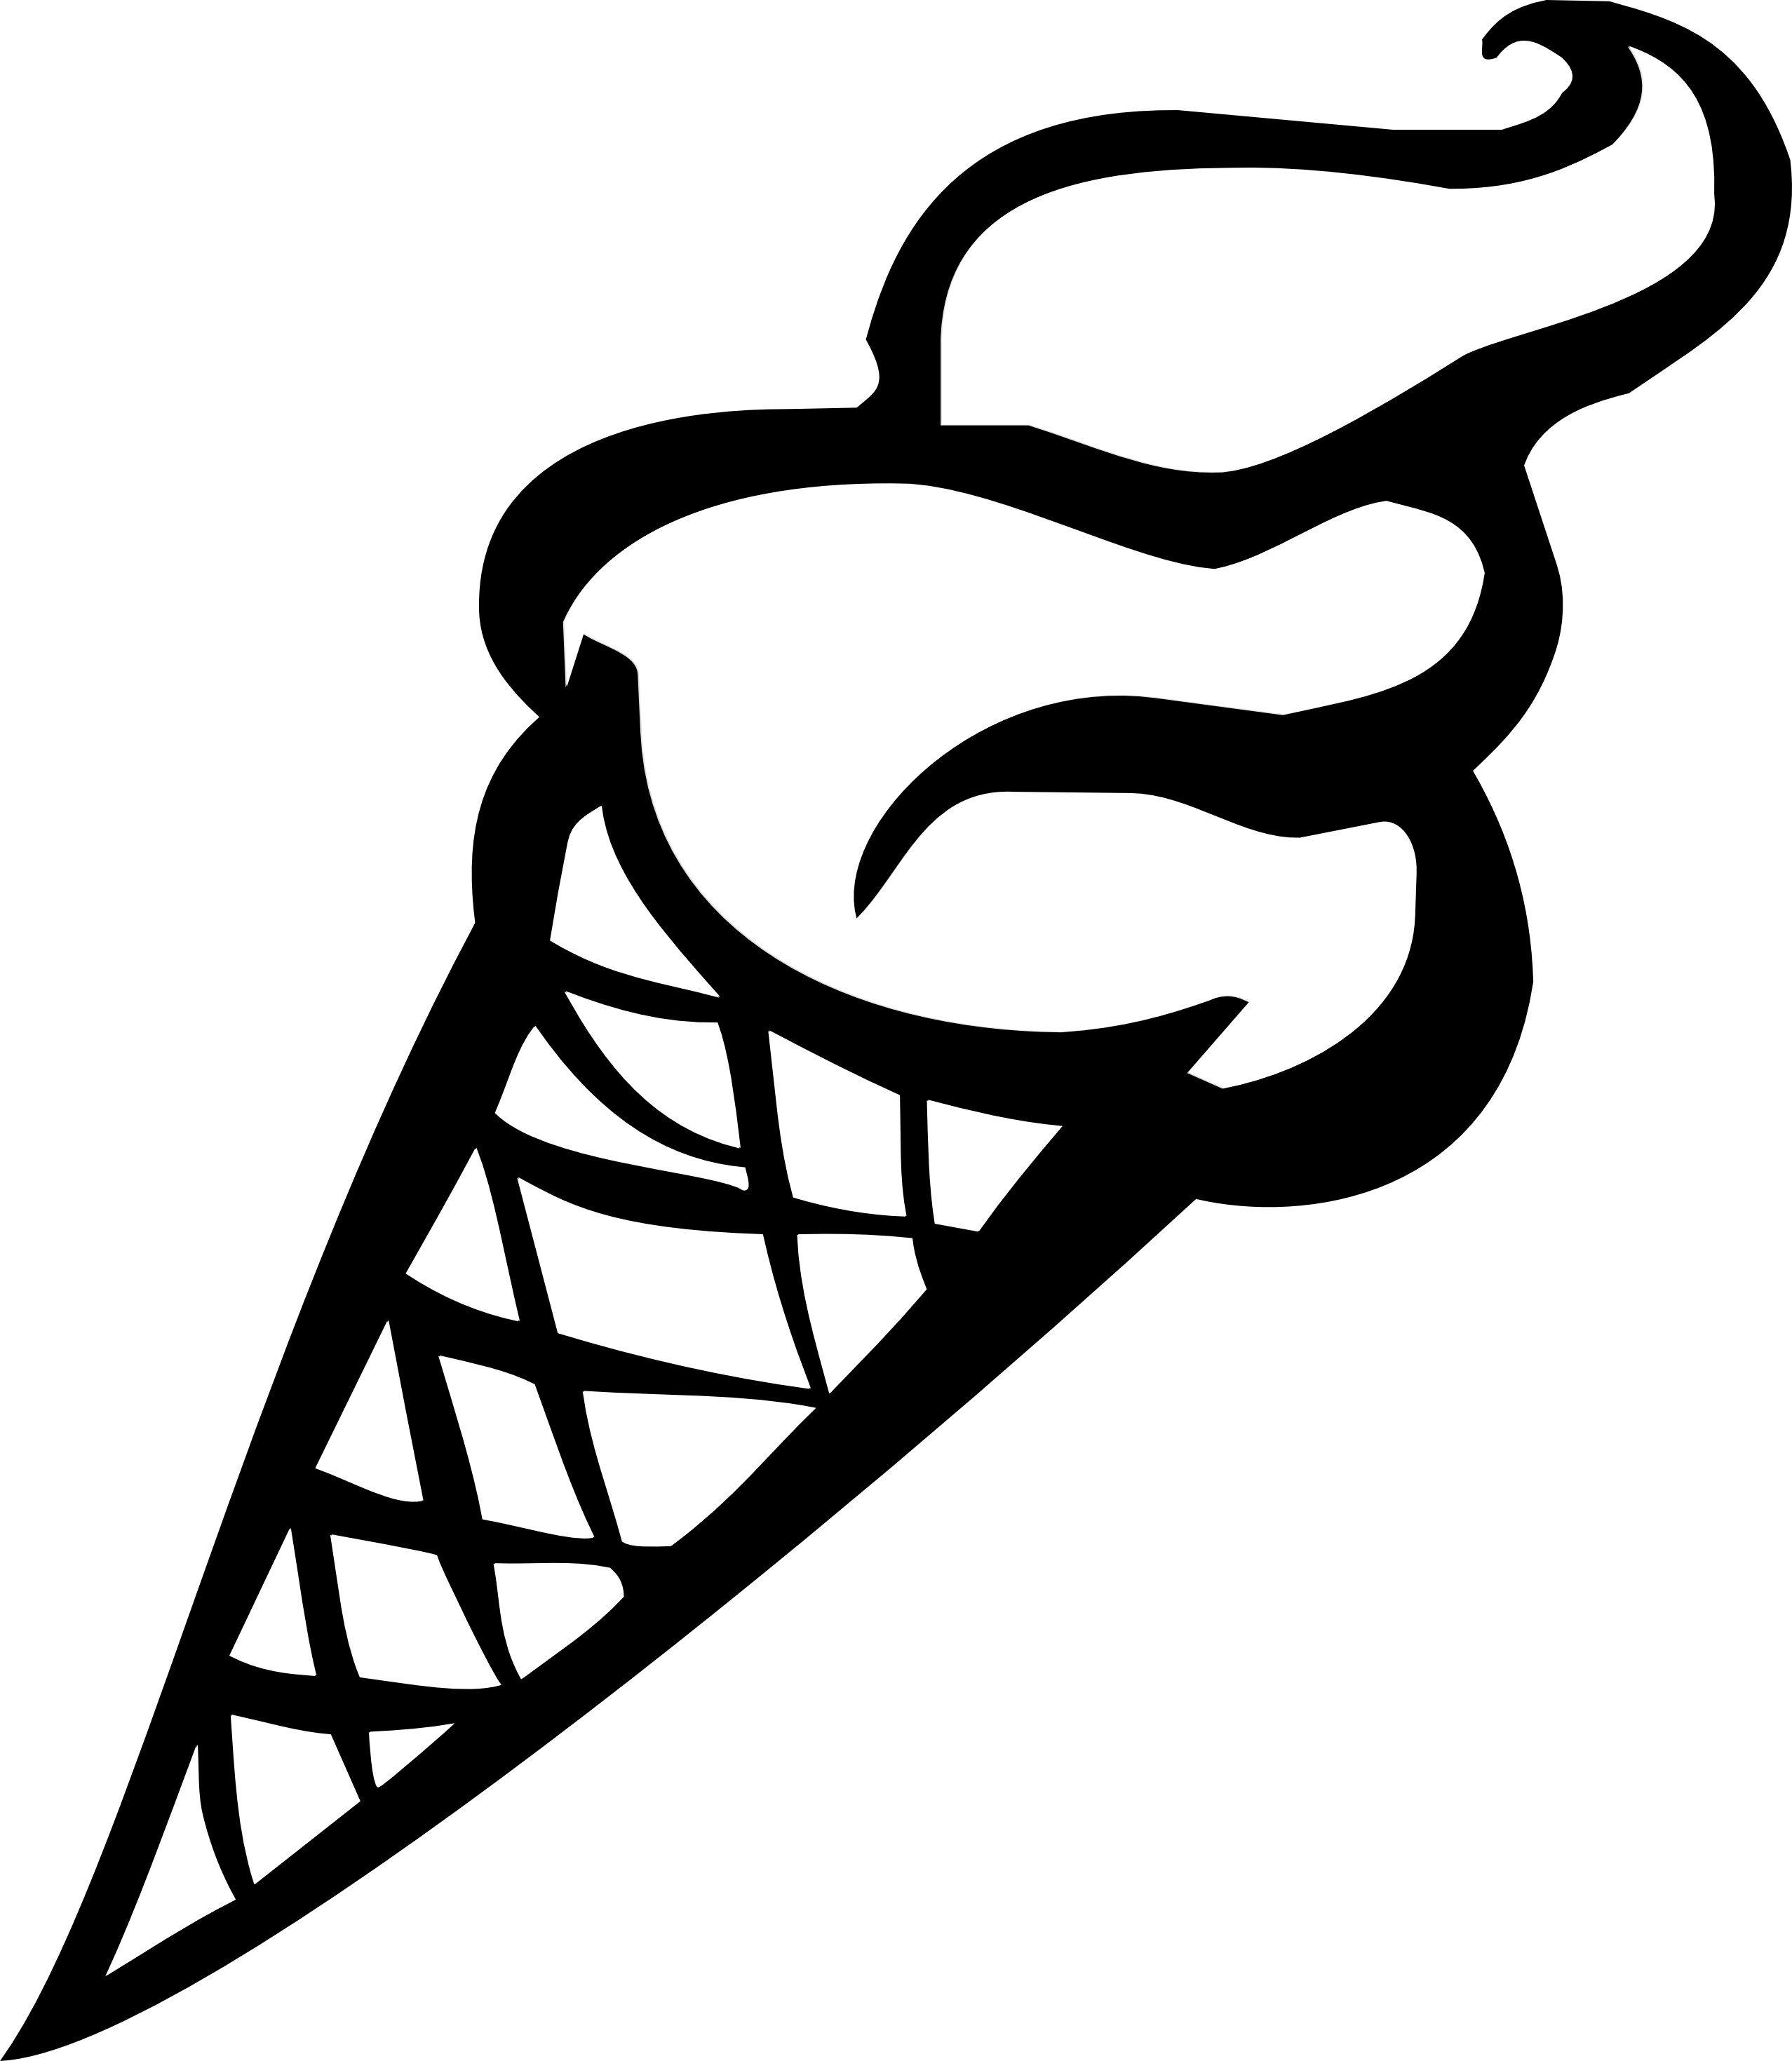 Ice cream scoop png. Waffle clipart black and white